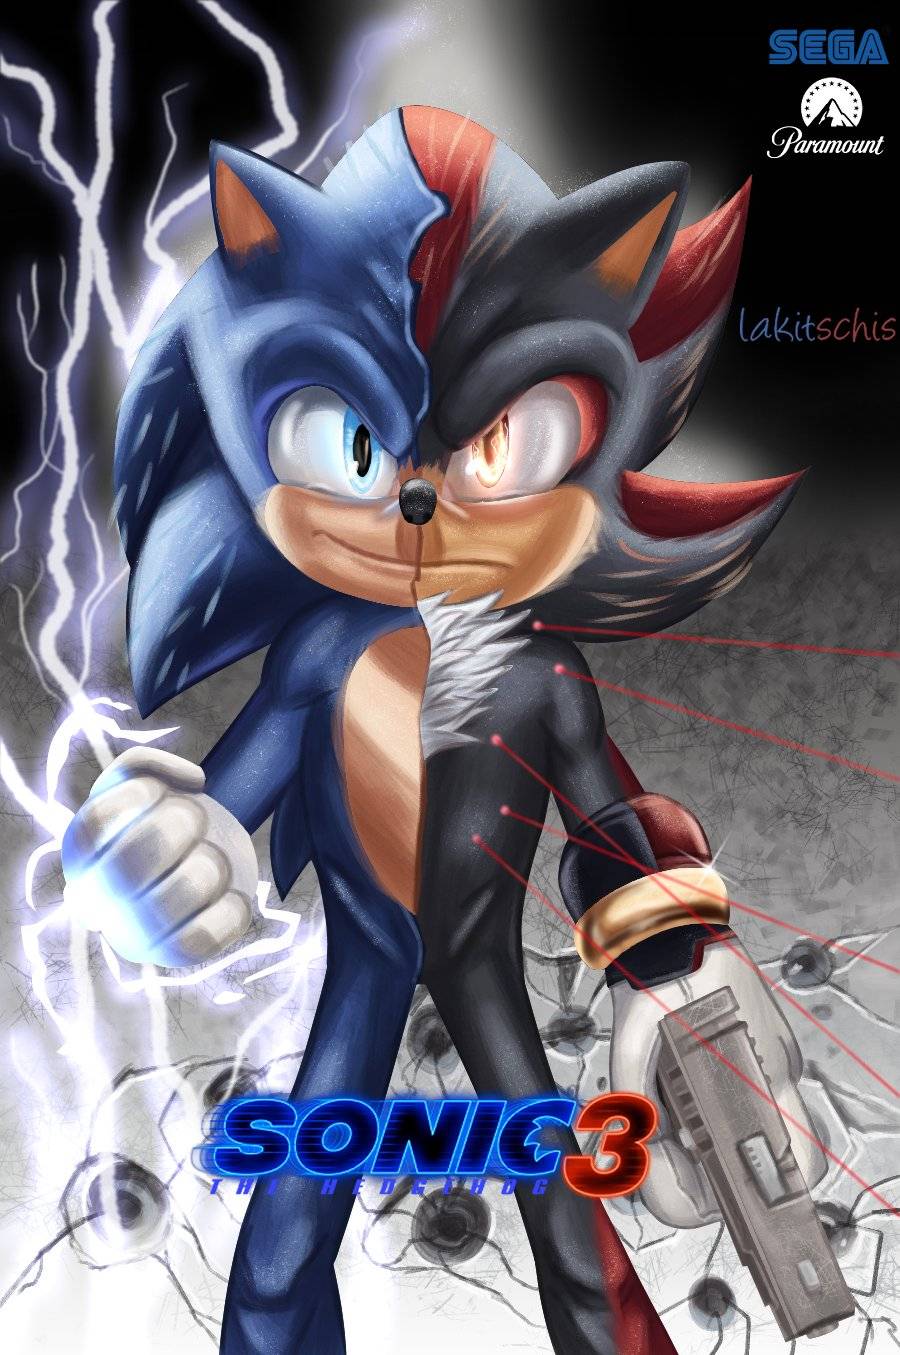 Sonic Prime Fanmade Poster 3 by Danic574 on DeviantArt